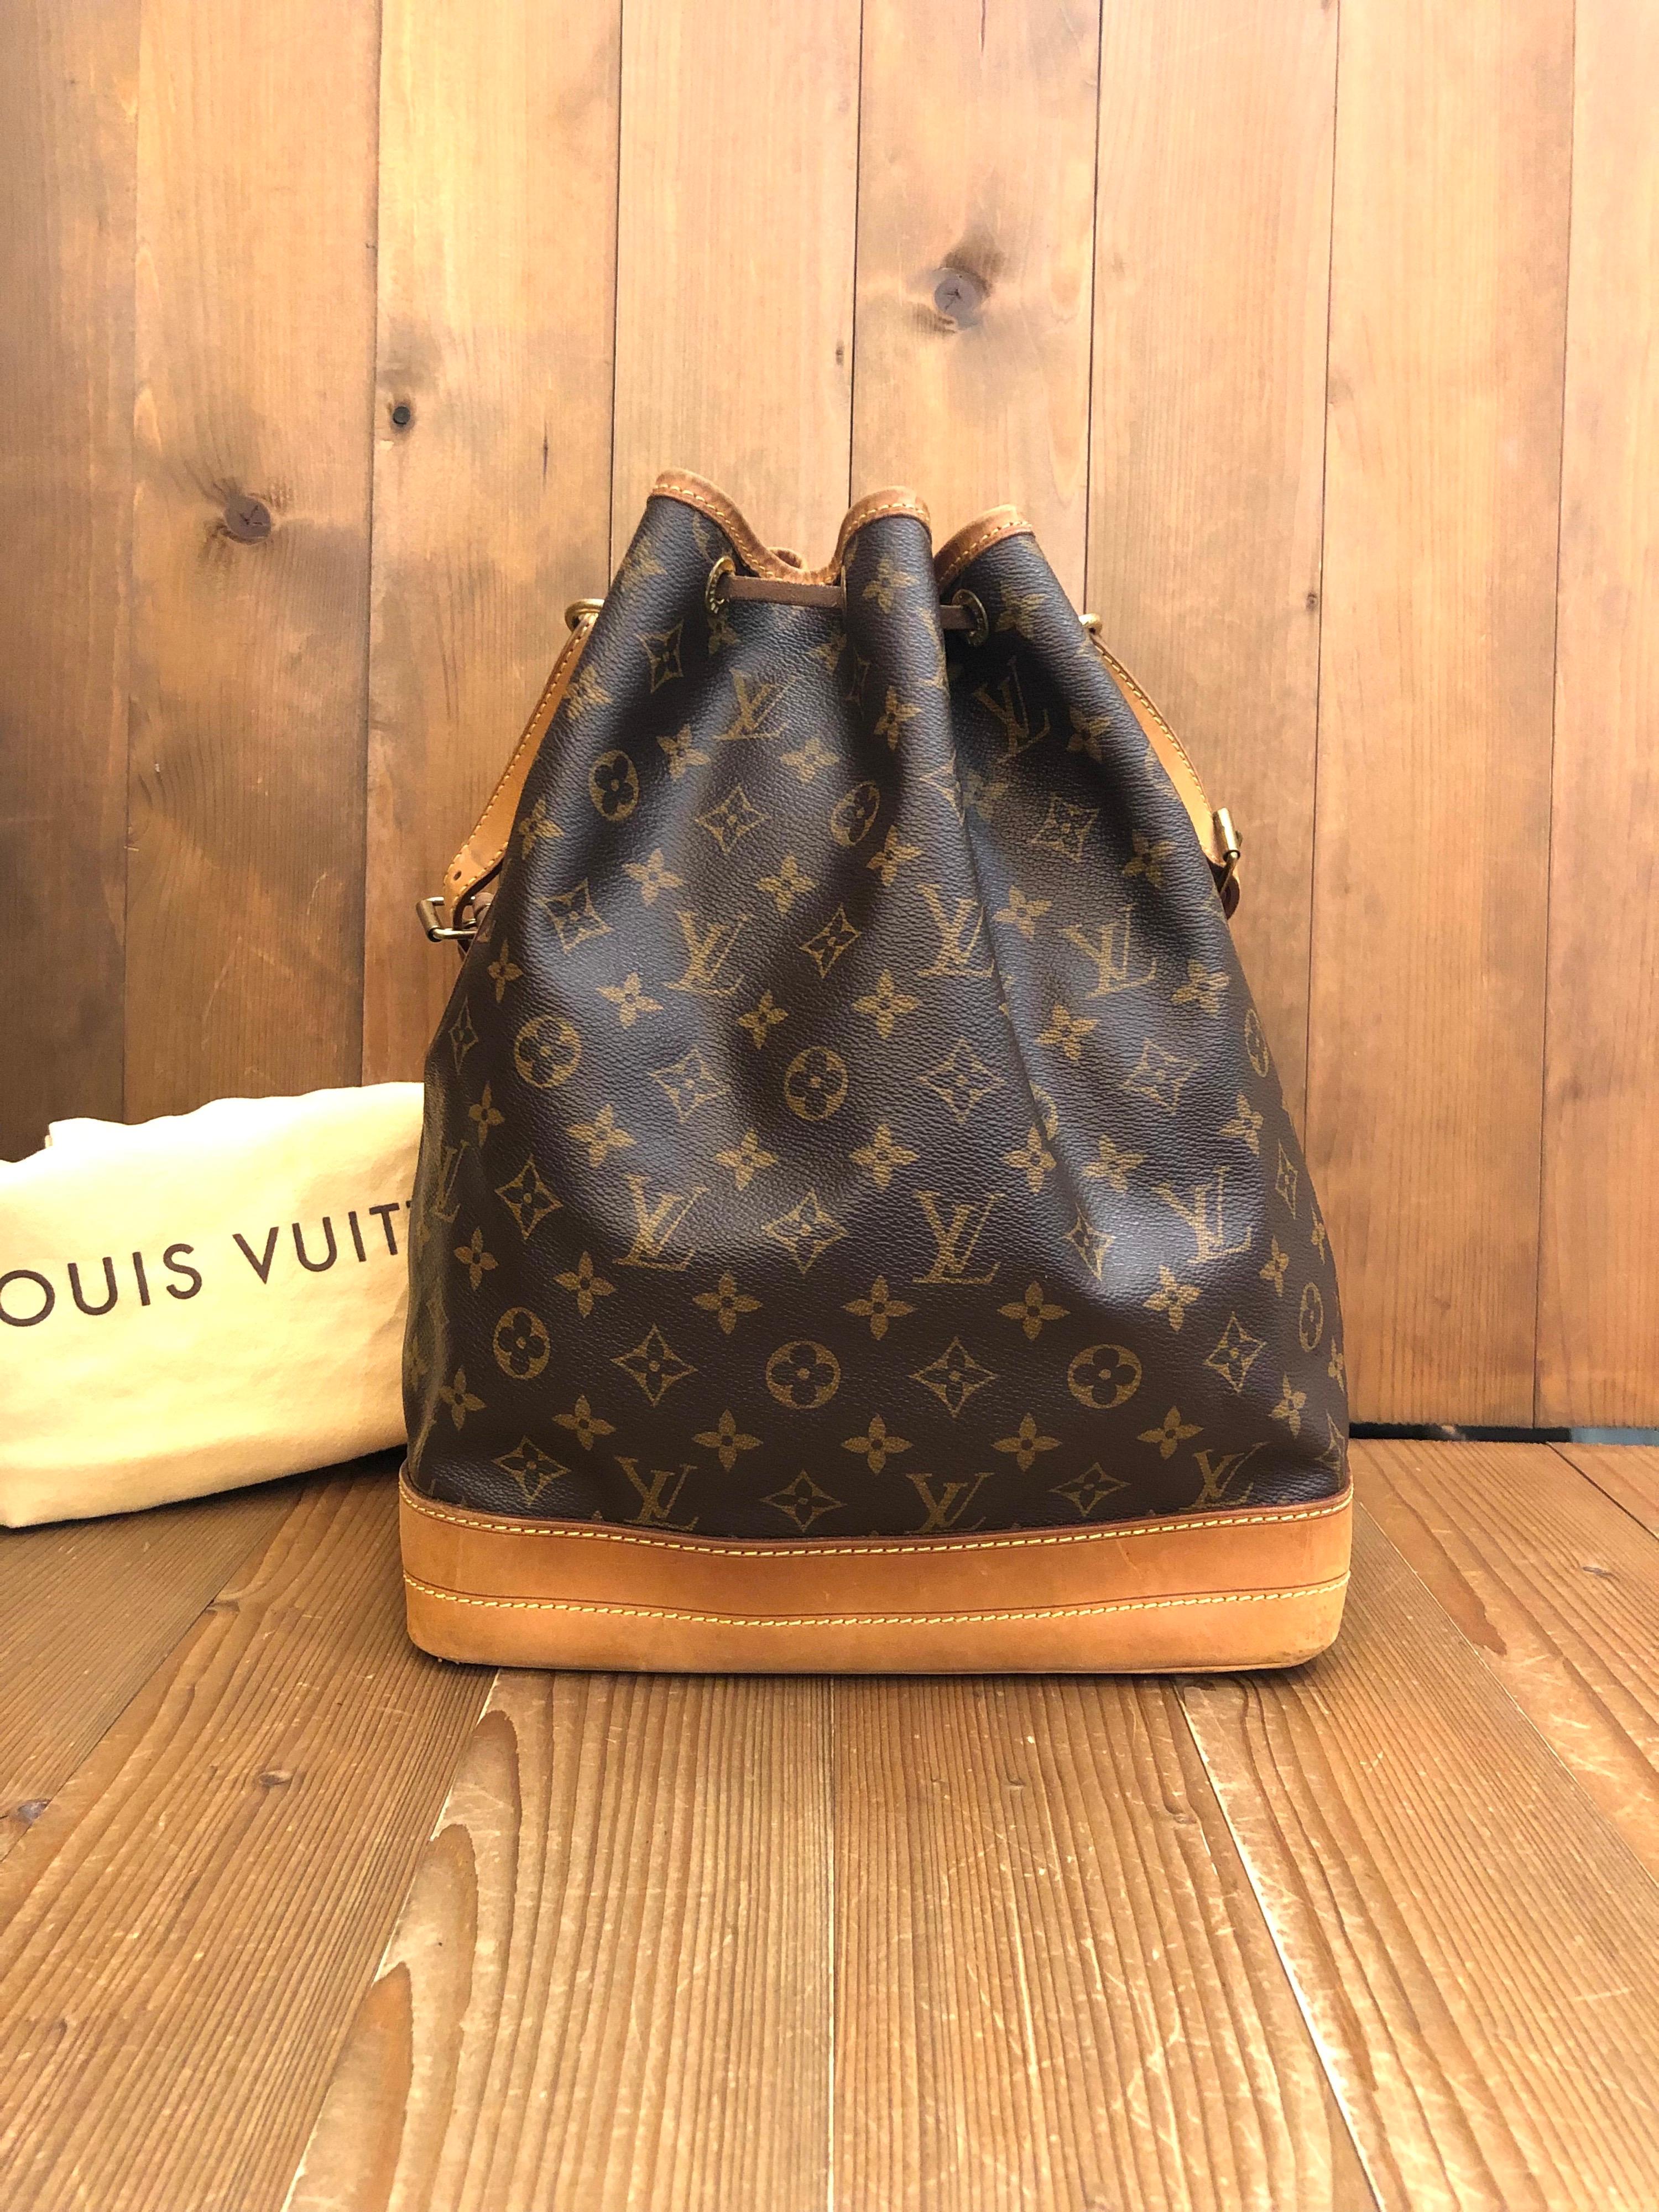 Louis Vuitton Noe GM shoulder bag in brown monogram canvas and vachetta leather. It was originally created in 1932 to carry bottles of Champagne.Made in France in 2011 with date-code AR0151. Measures 10 x 13.75 x 7.5 inches Strap drop 11 inches.